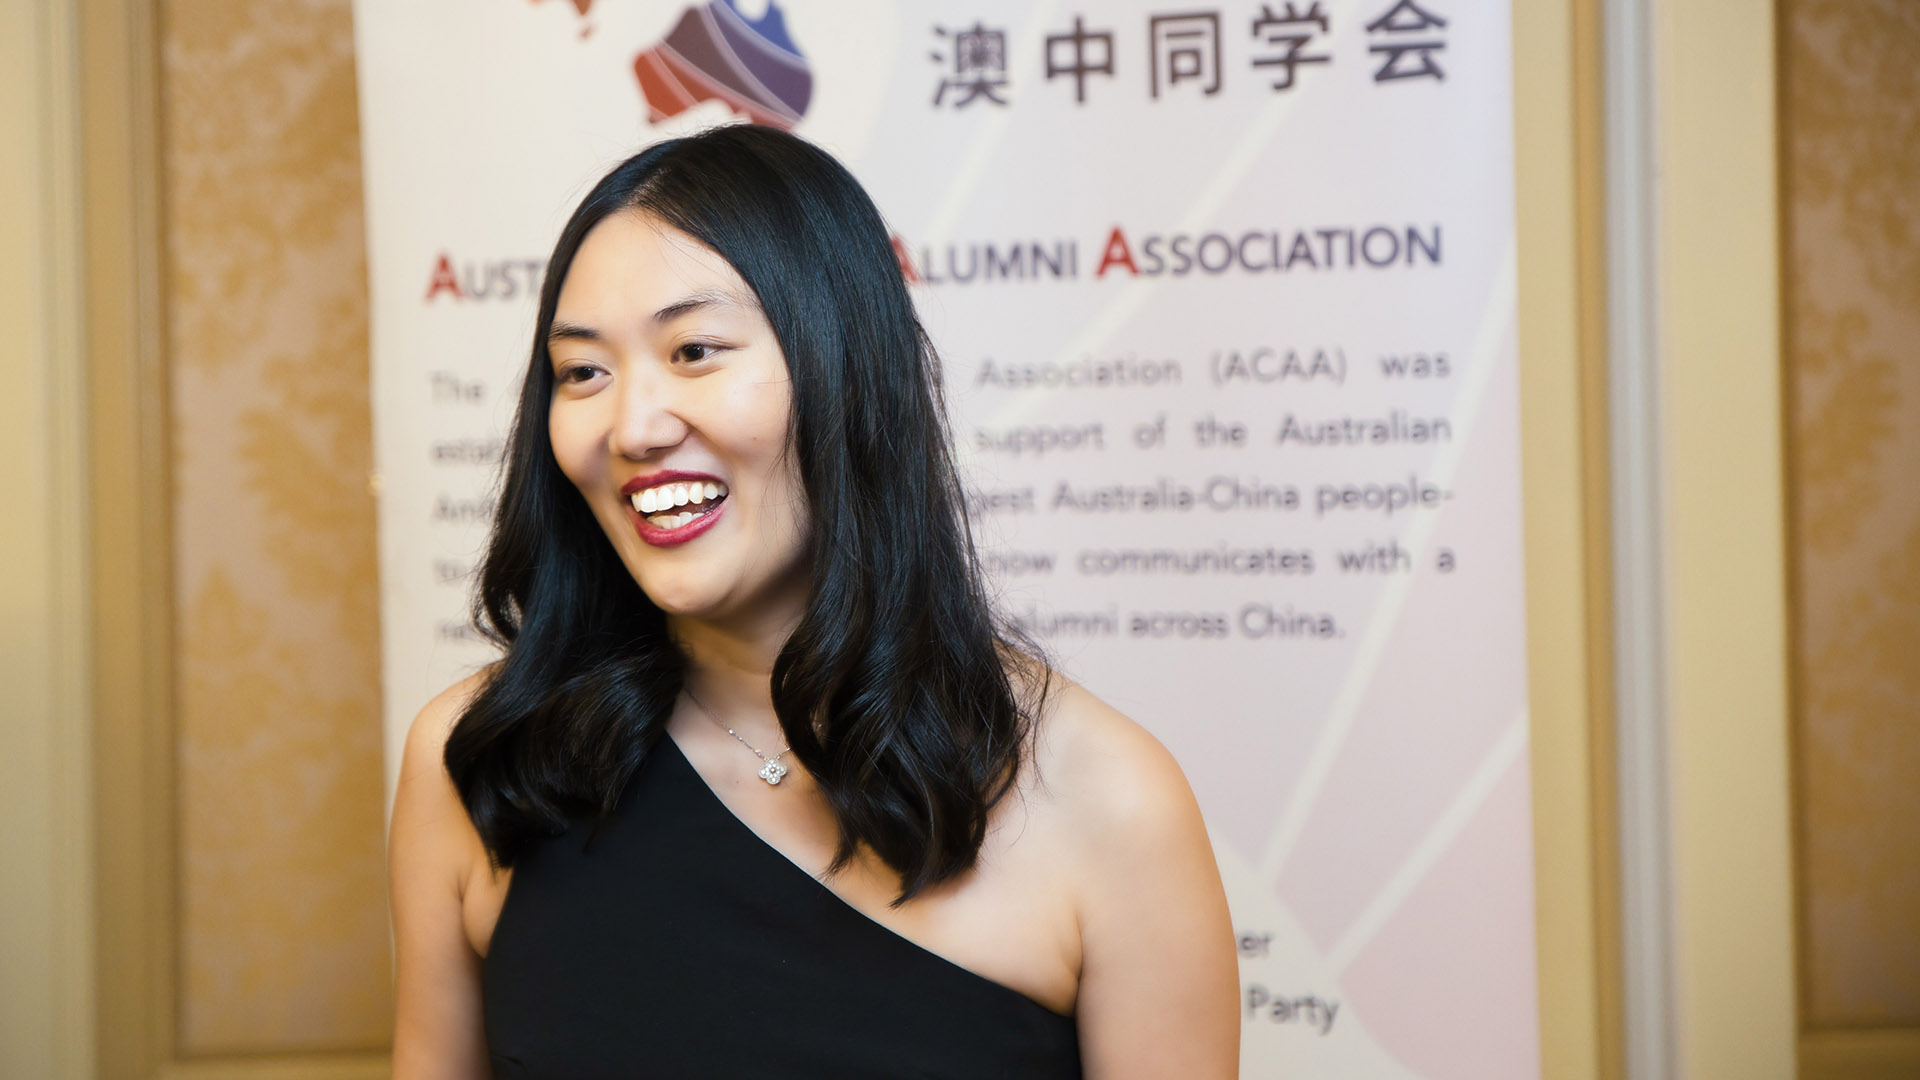 UOW alumni Susan Zhang is presented with a Judges' Commendation at the 2022 Australia China Alumni Association Awards